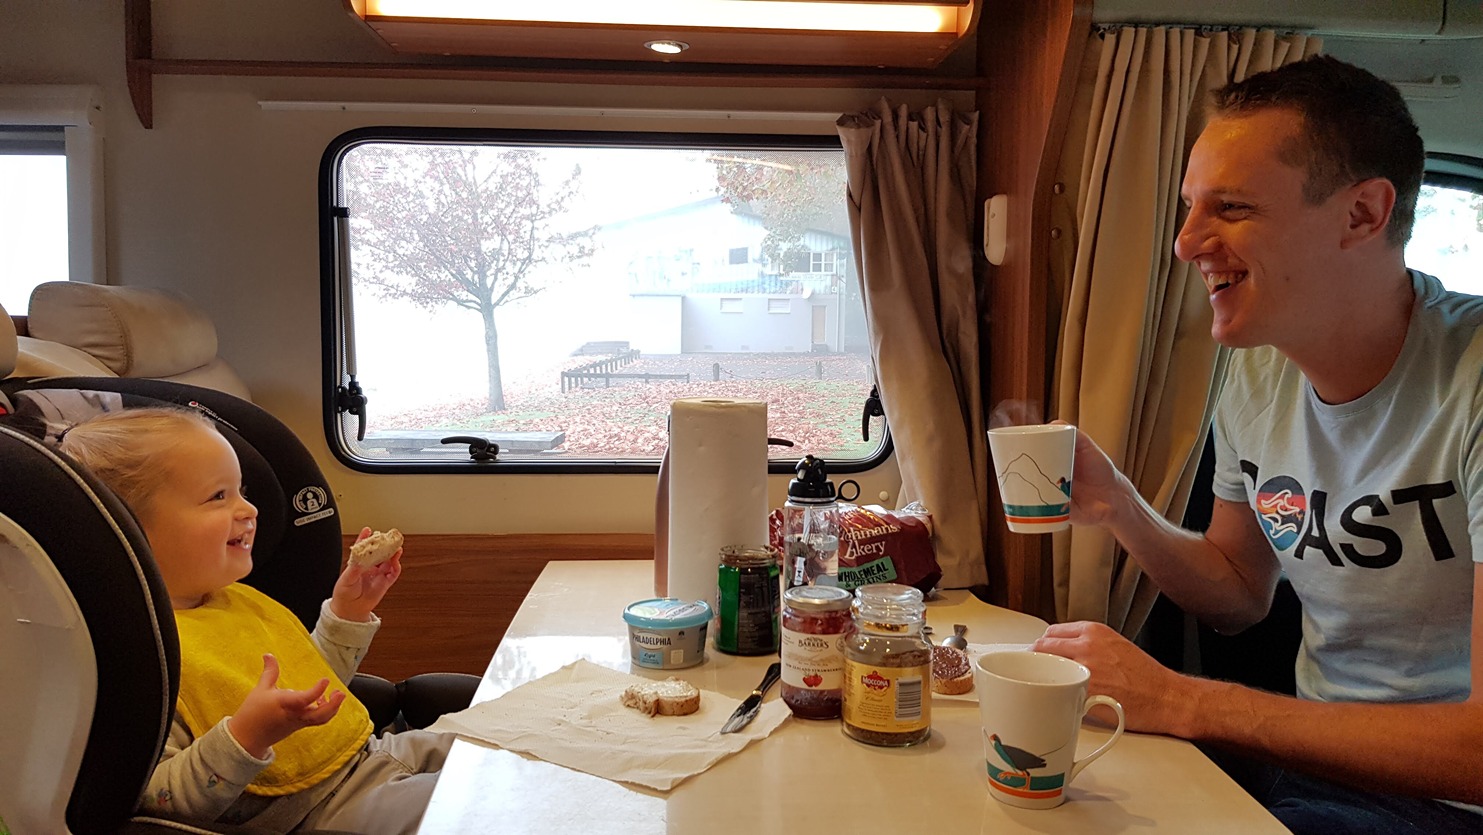 Dad and child having a breakfast in dining area of a motorhome